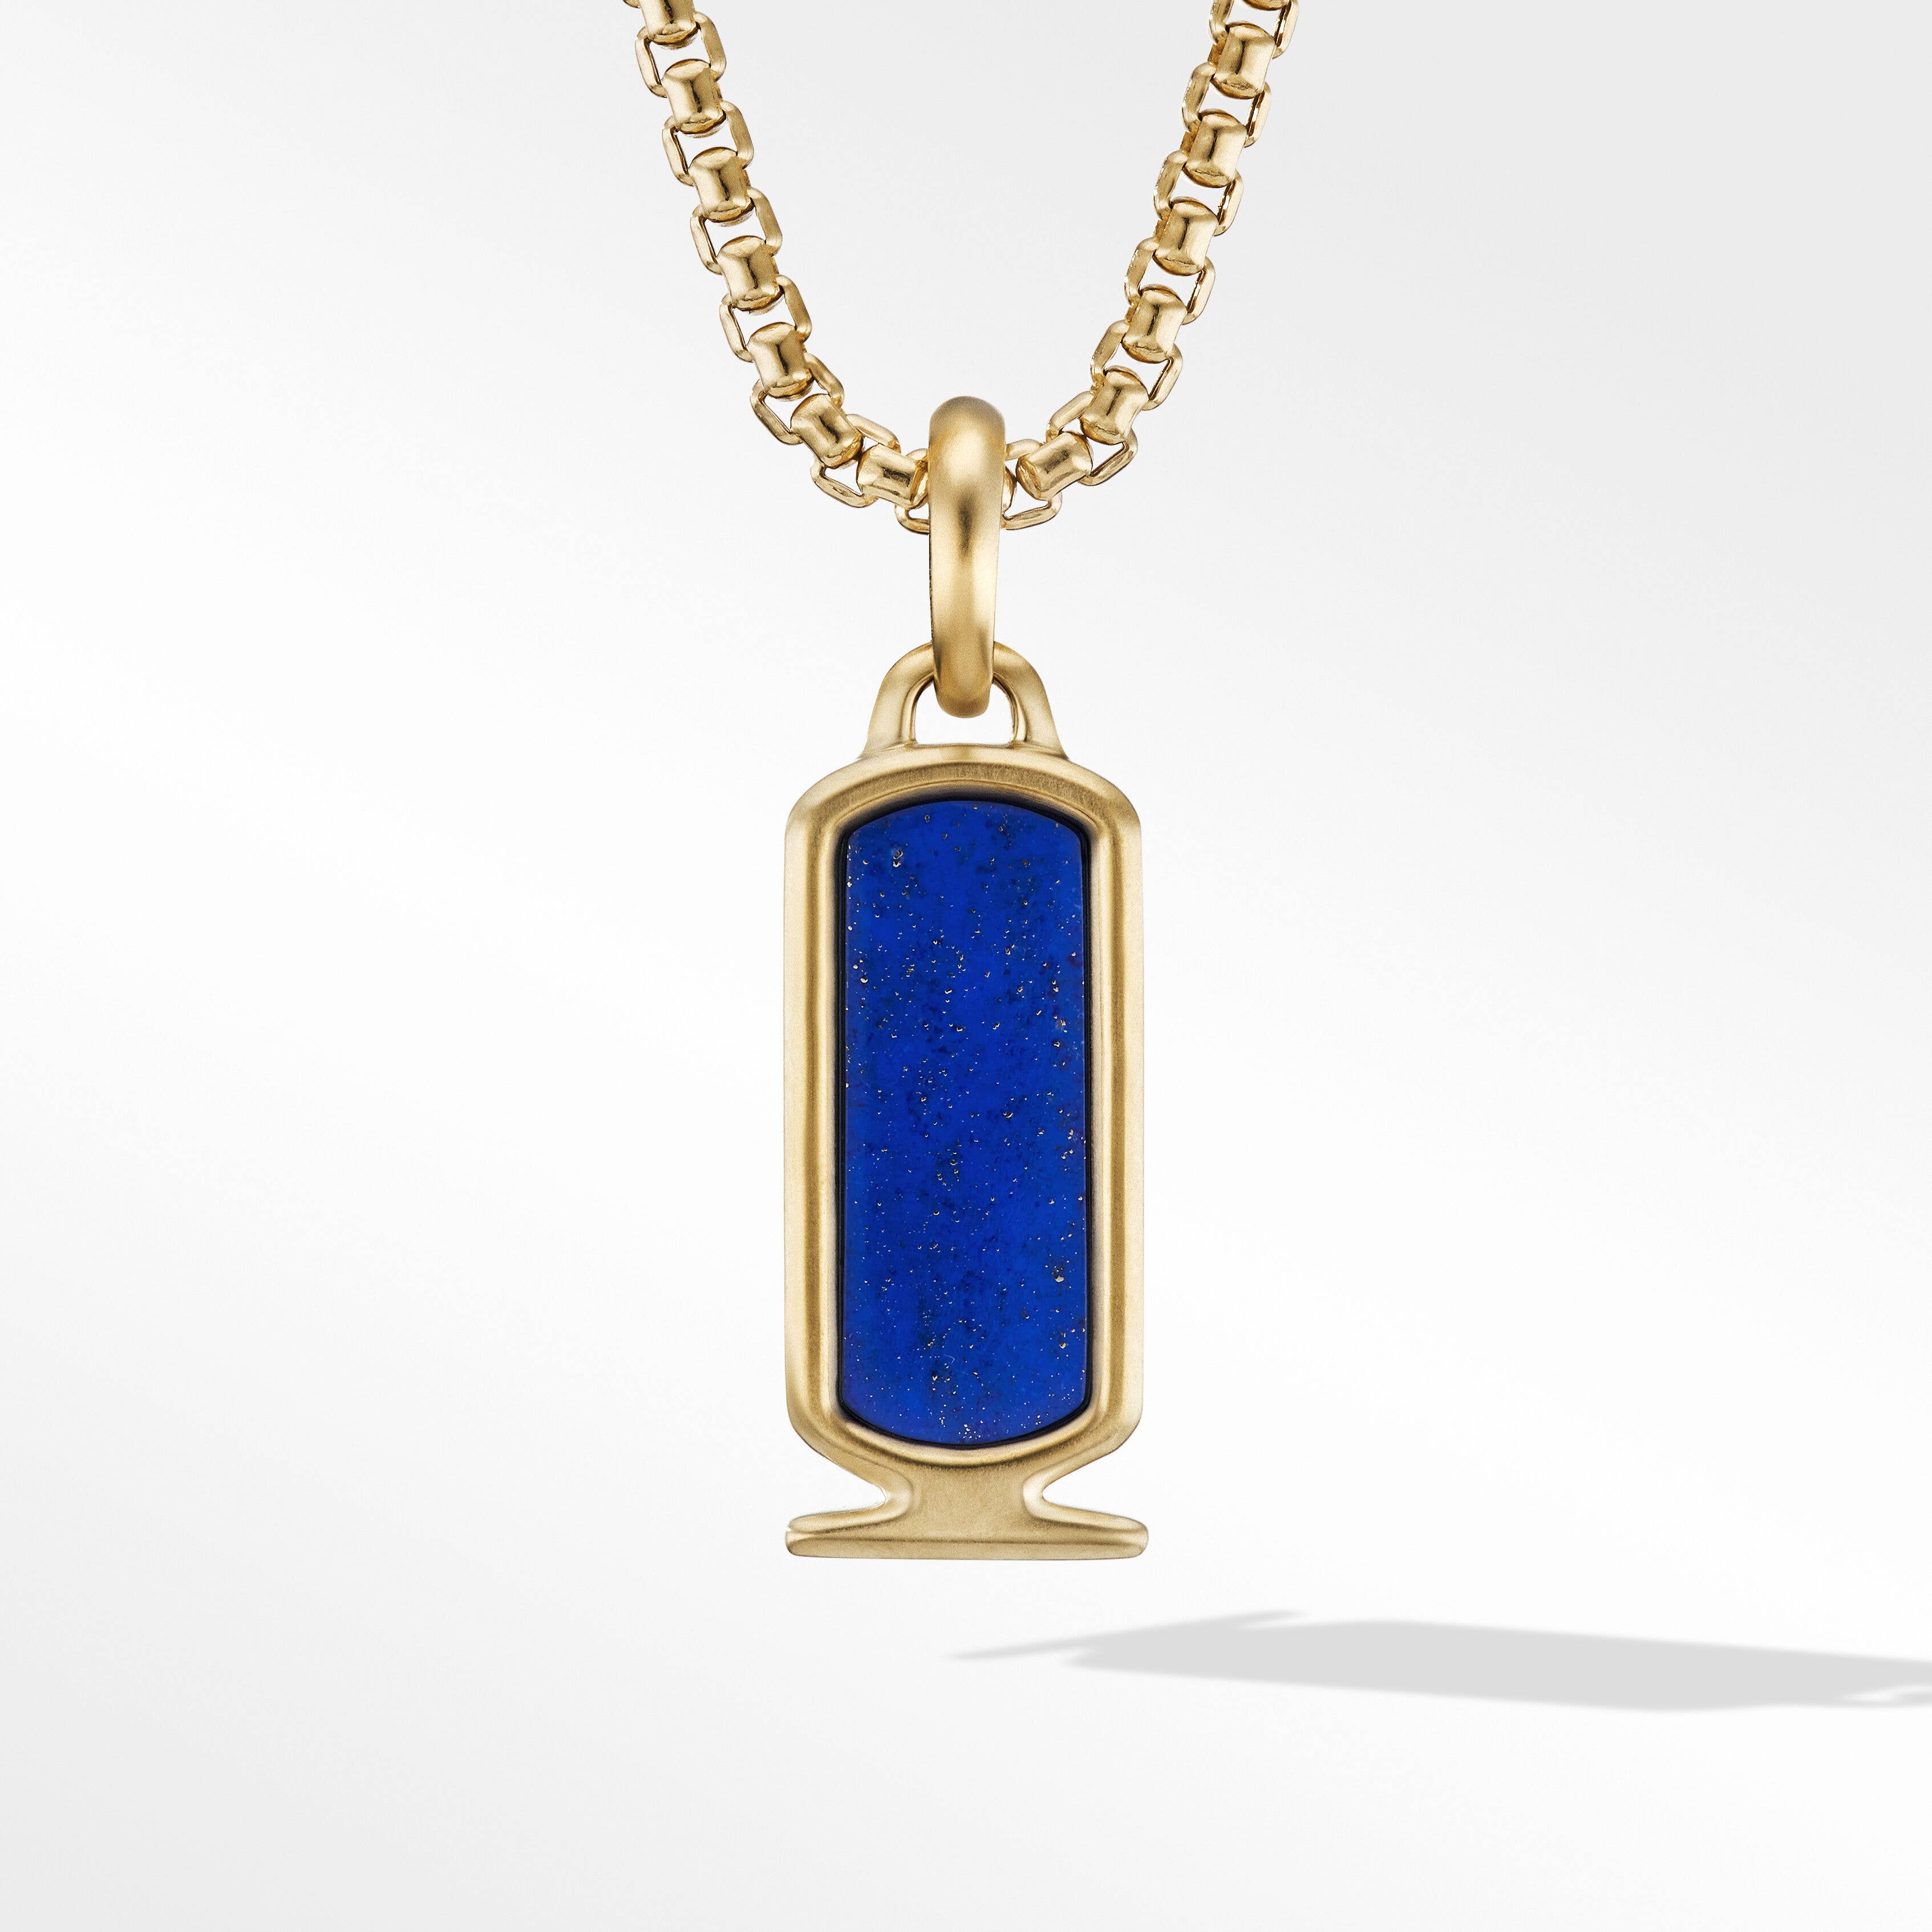 Cairo Cartouche Amulet in 18K Yellow Gold with Lapis